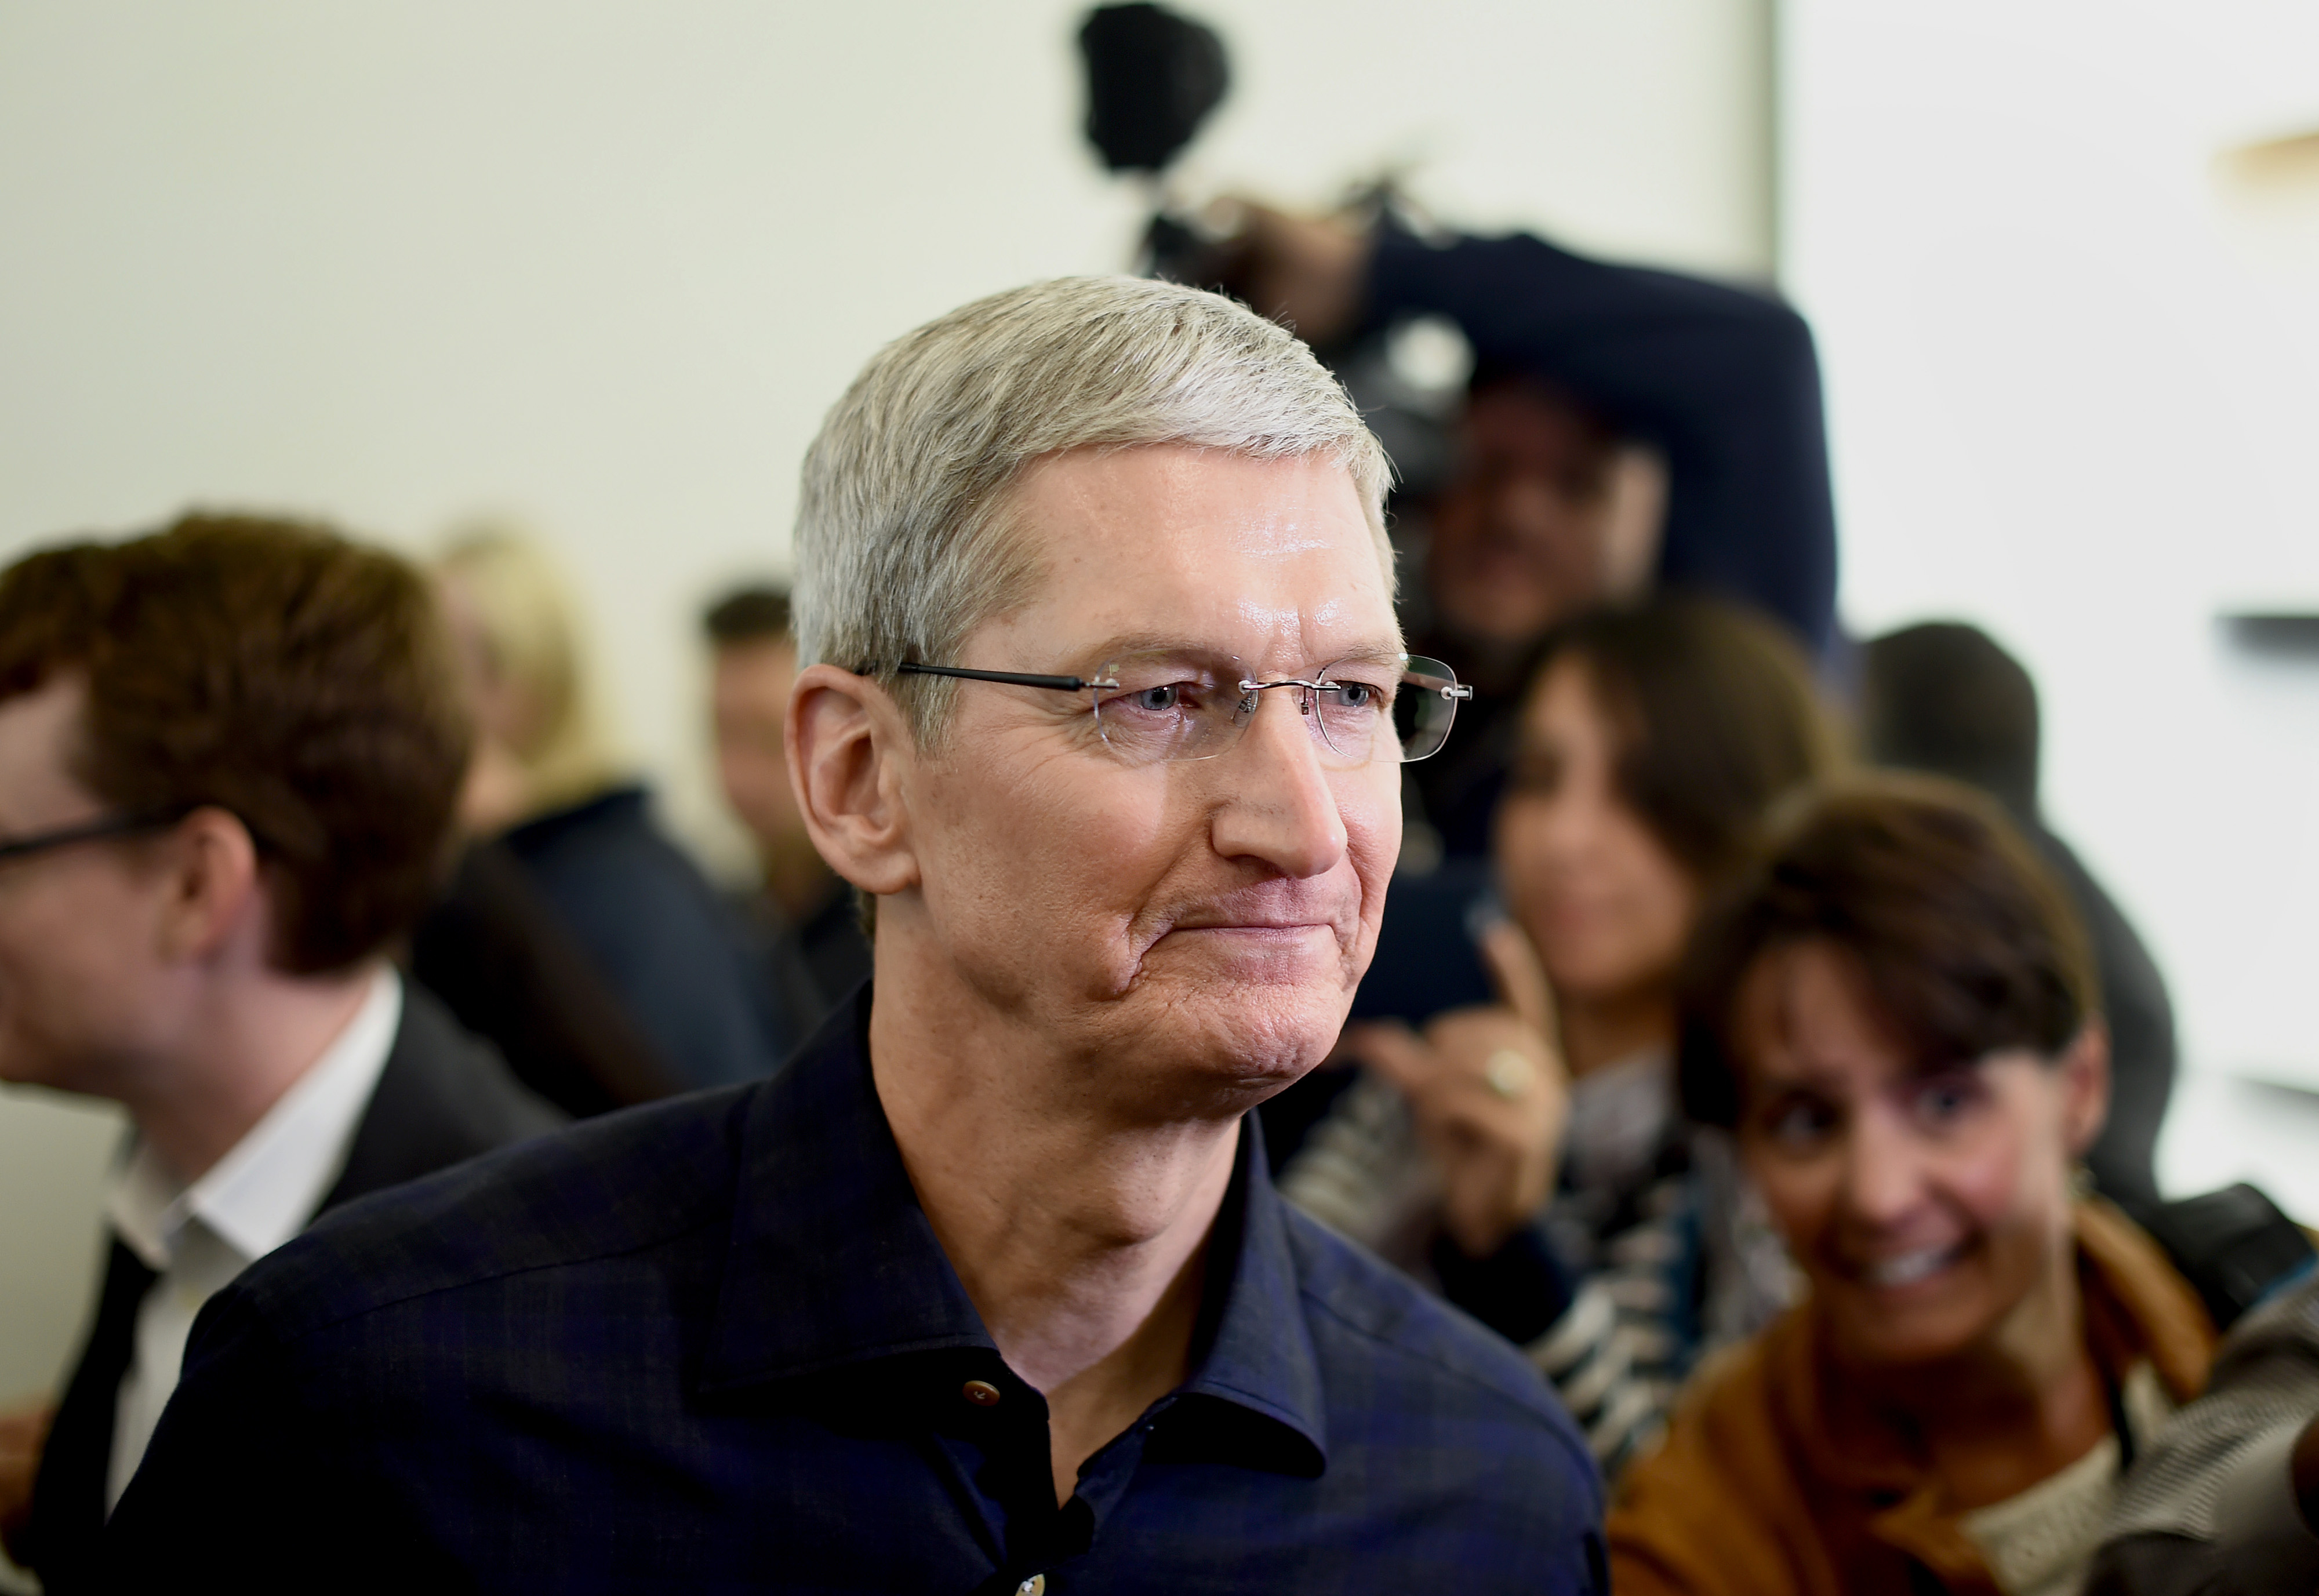 Apple CEO Tim Cook speaks with members of the media after a product announcement in Cupertino, California, U.S., on Thursday, Oct. 16, 2014. (Noah Berger—Bloomberg / Getty Images)